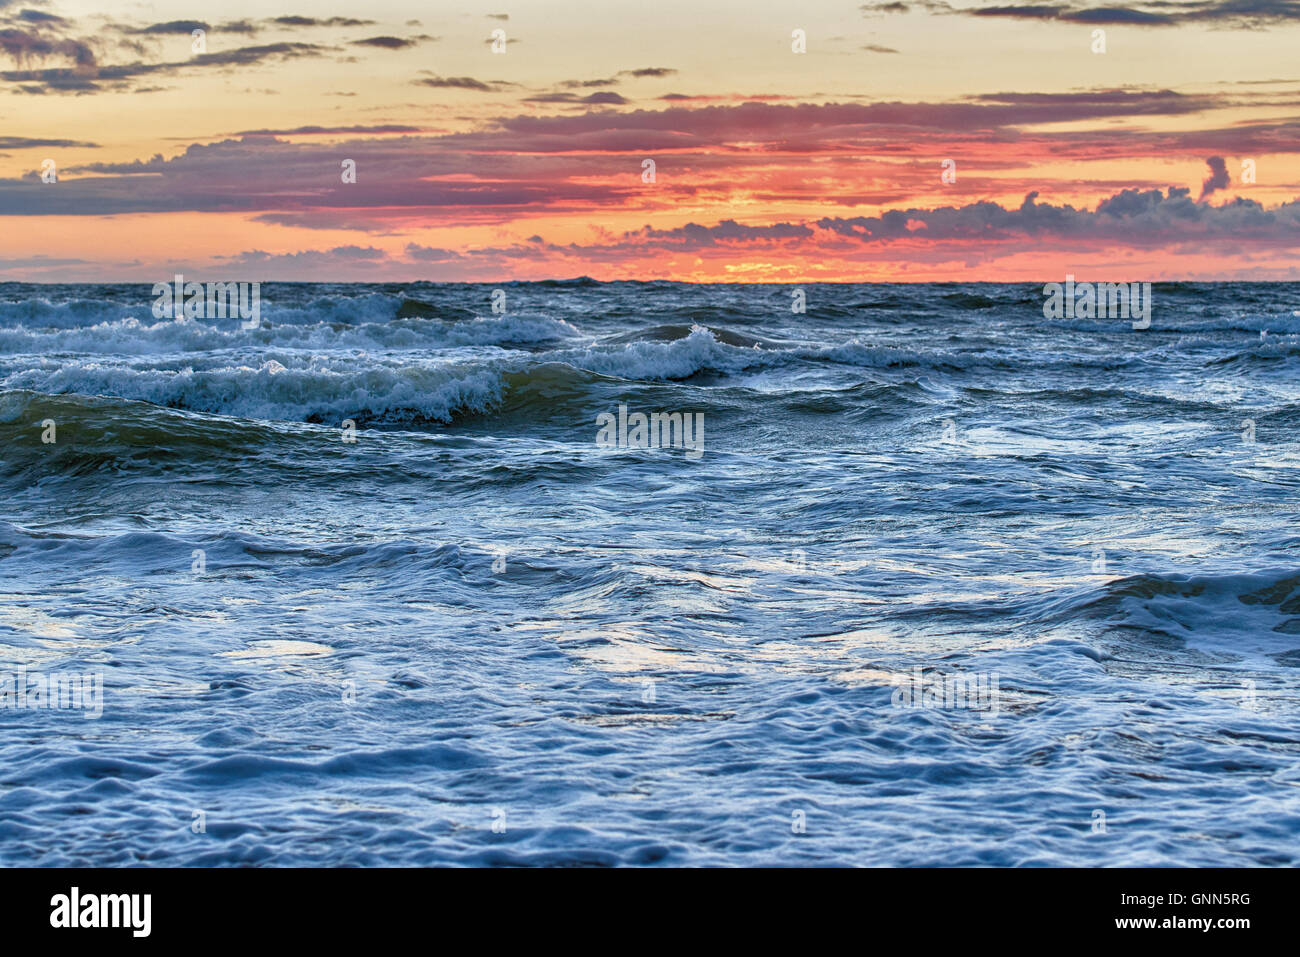 Sunset At The Stormy Sea Stock Photo